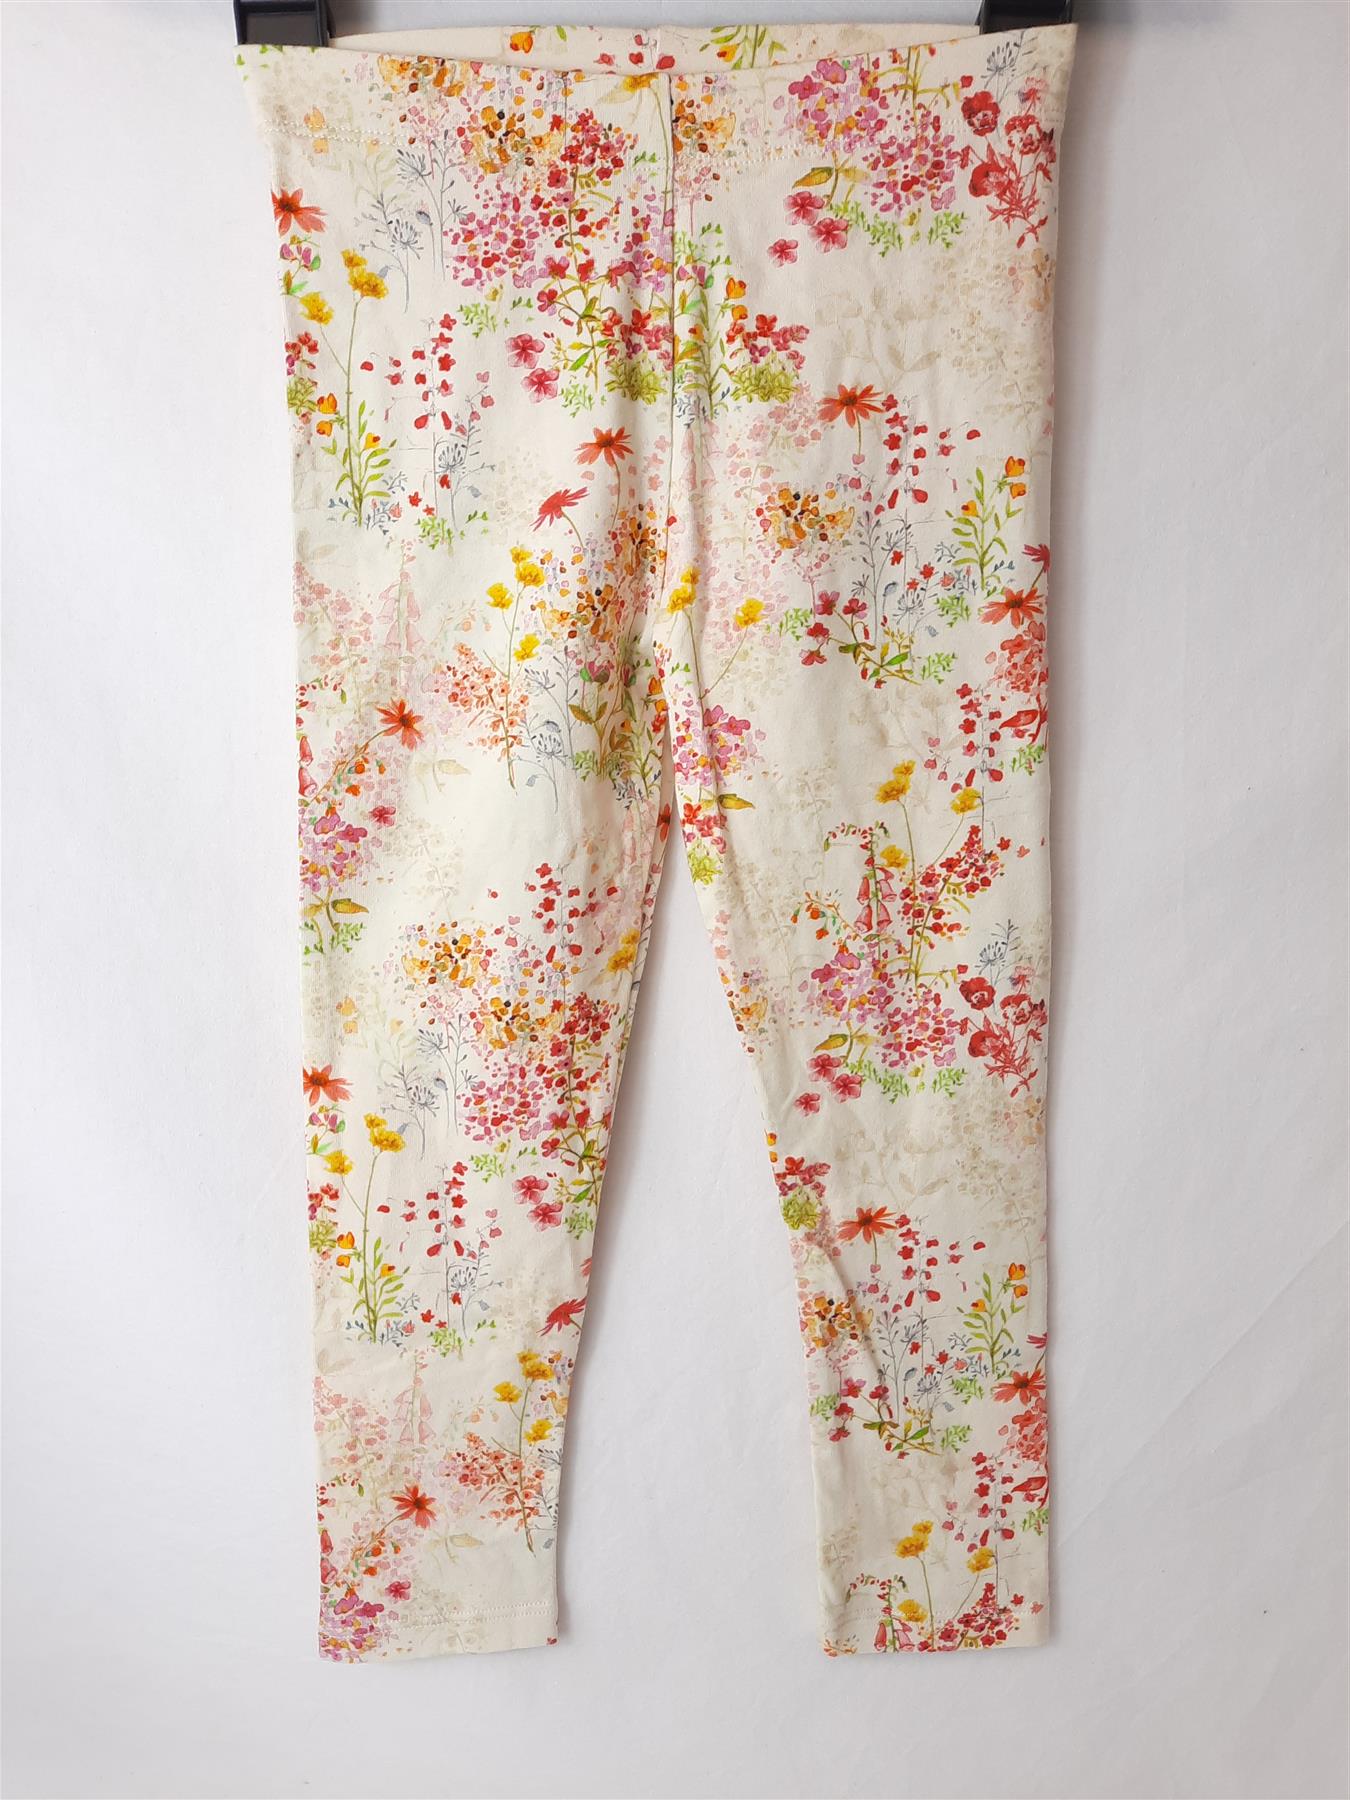 Girls' Cotton Floral Leggings 2-Pack Soft Stretch Trousers Ex-Chainstore Kids'